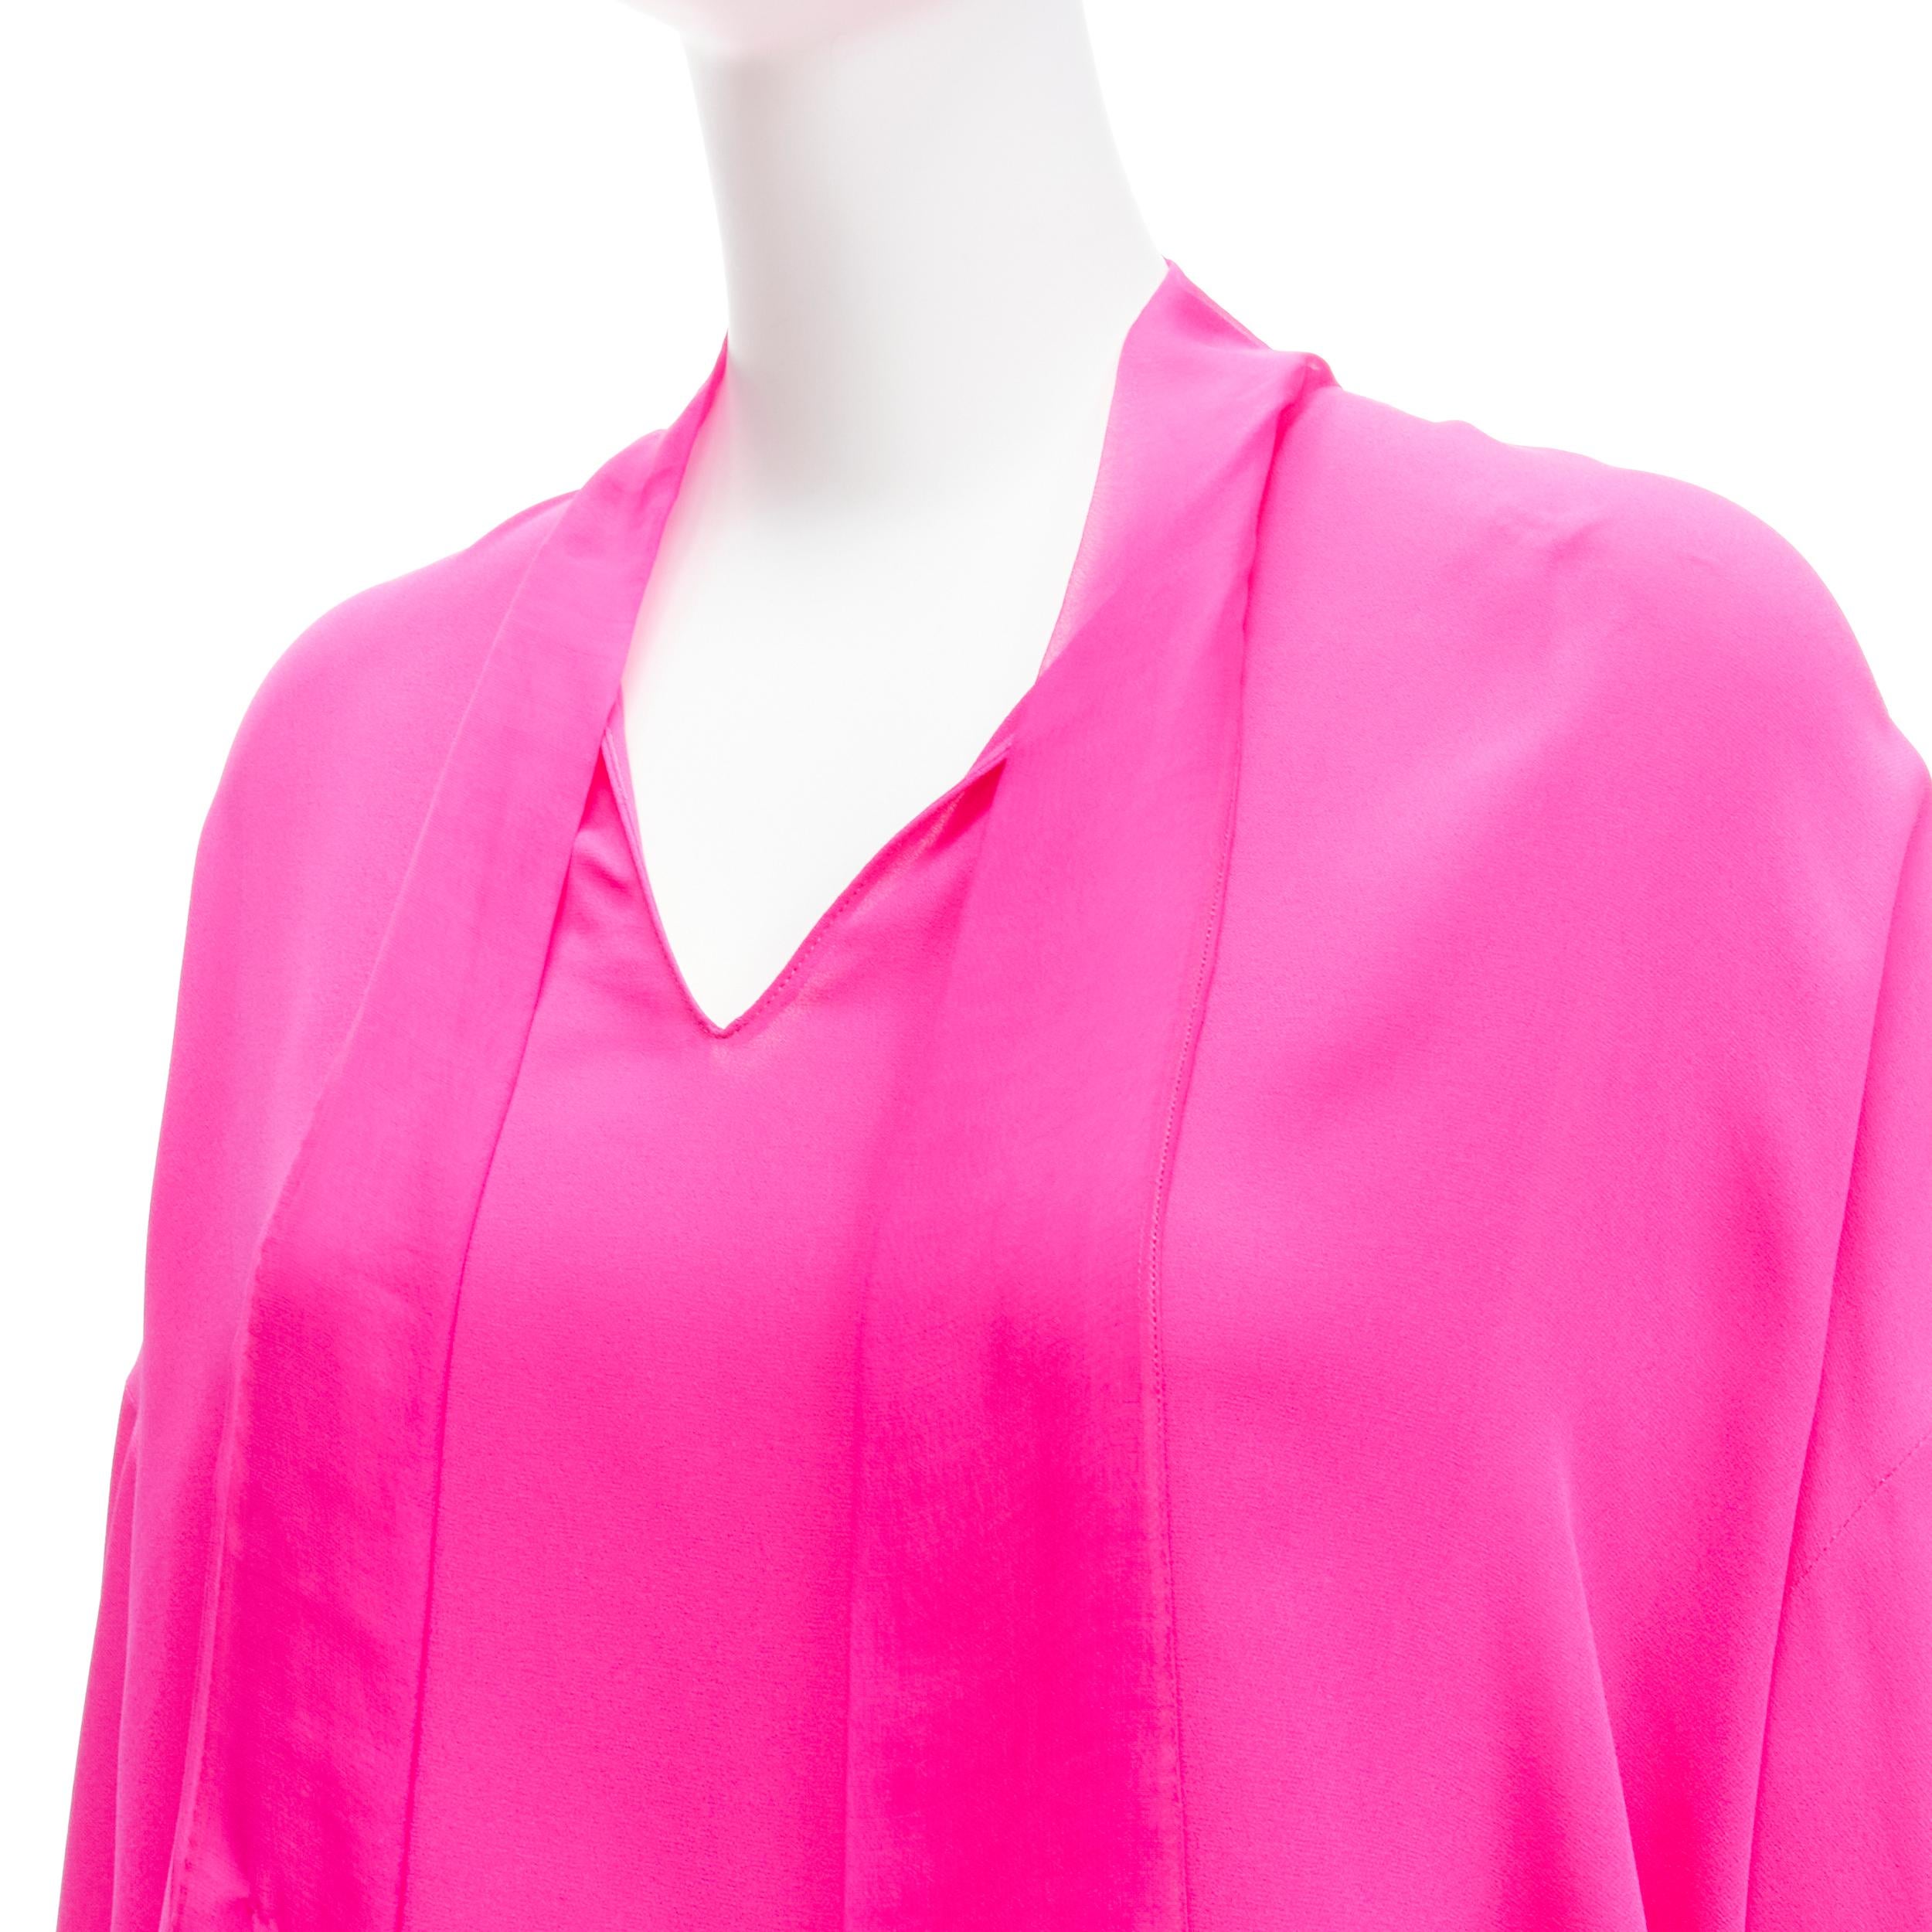 VALENTINO Piccioli 2022 Runway Pink PP 100% silk neck tie relaxed blouse IT38 XS
Reference: AAWC/A00484
Brand: Valentino
Designer: Pier Paolo Piccioli
Collection: 2022 - Runway
Material: Silk
Color: Pink
Pattern: Solid
Closure: Self Tie
Extra